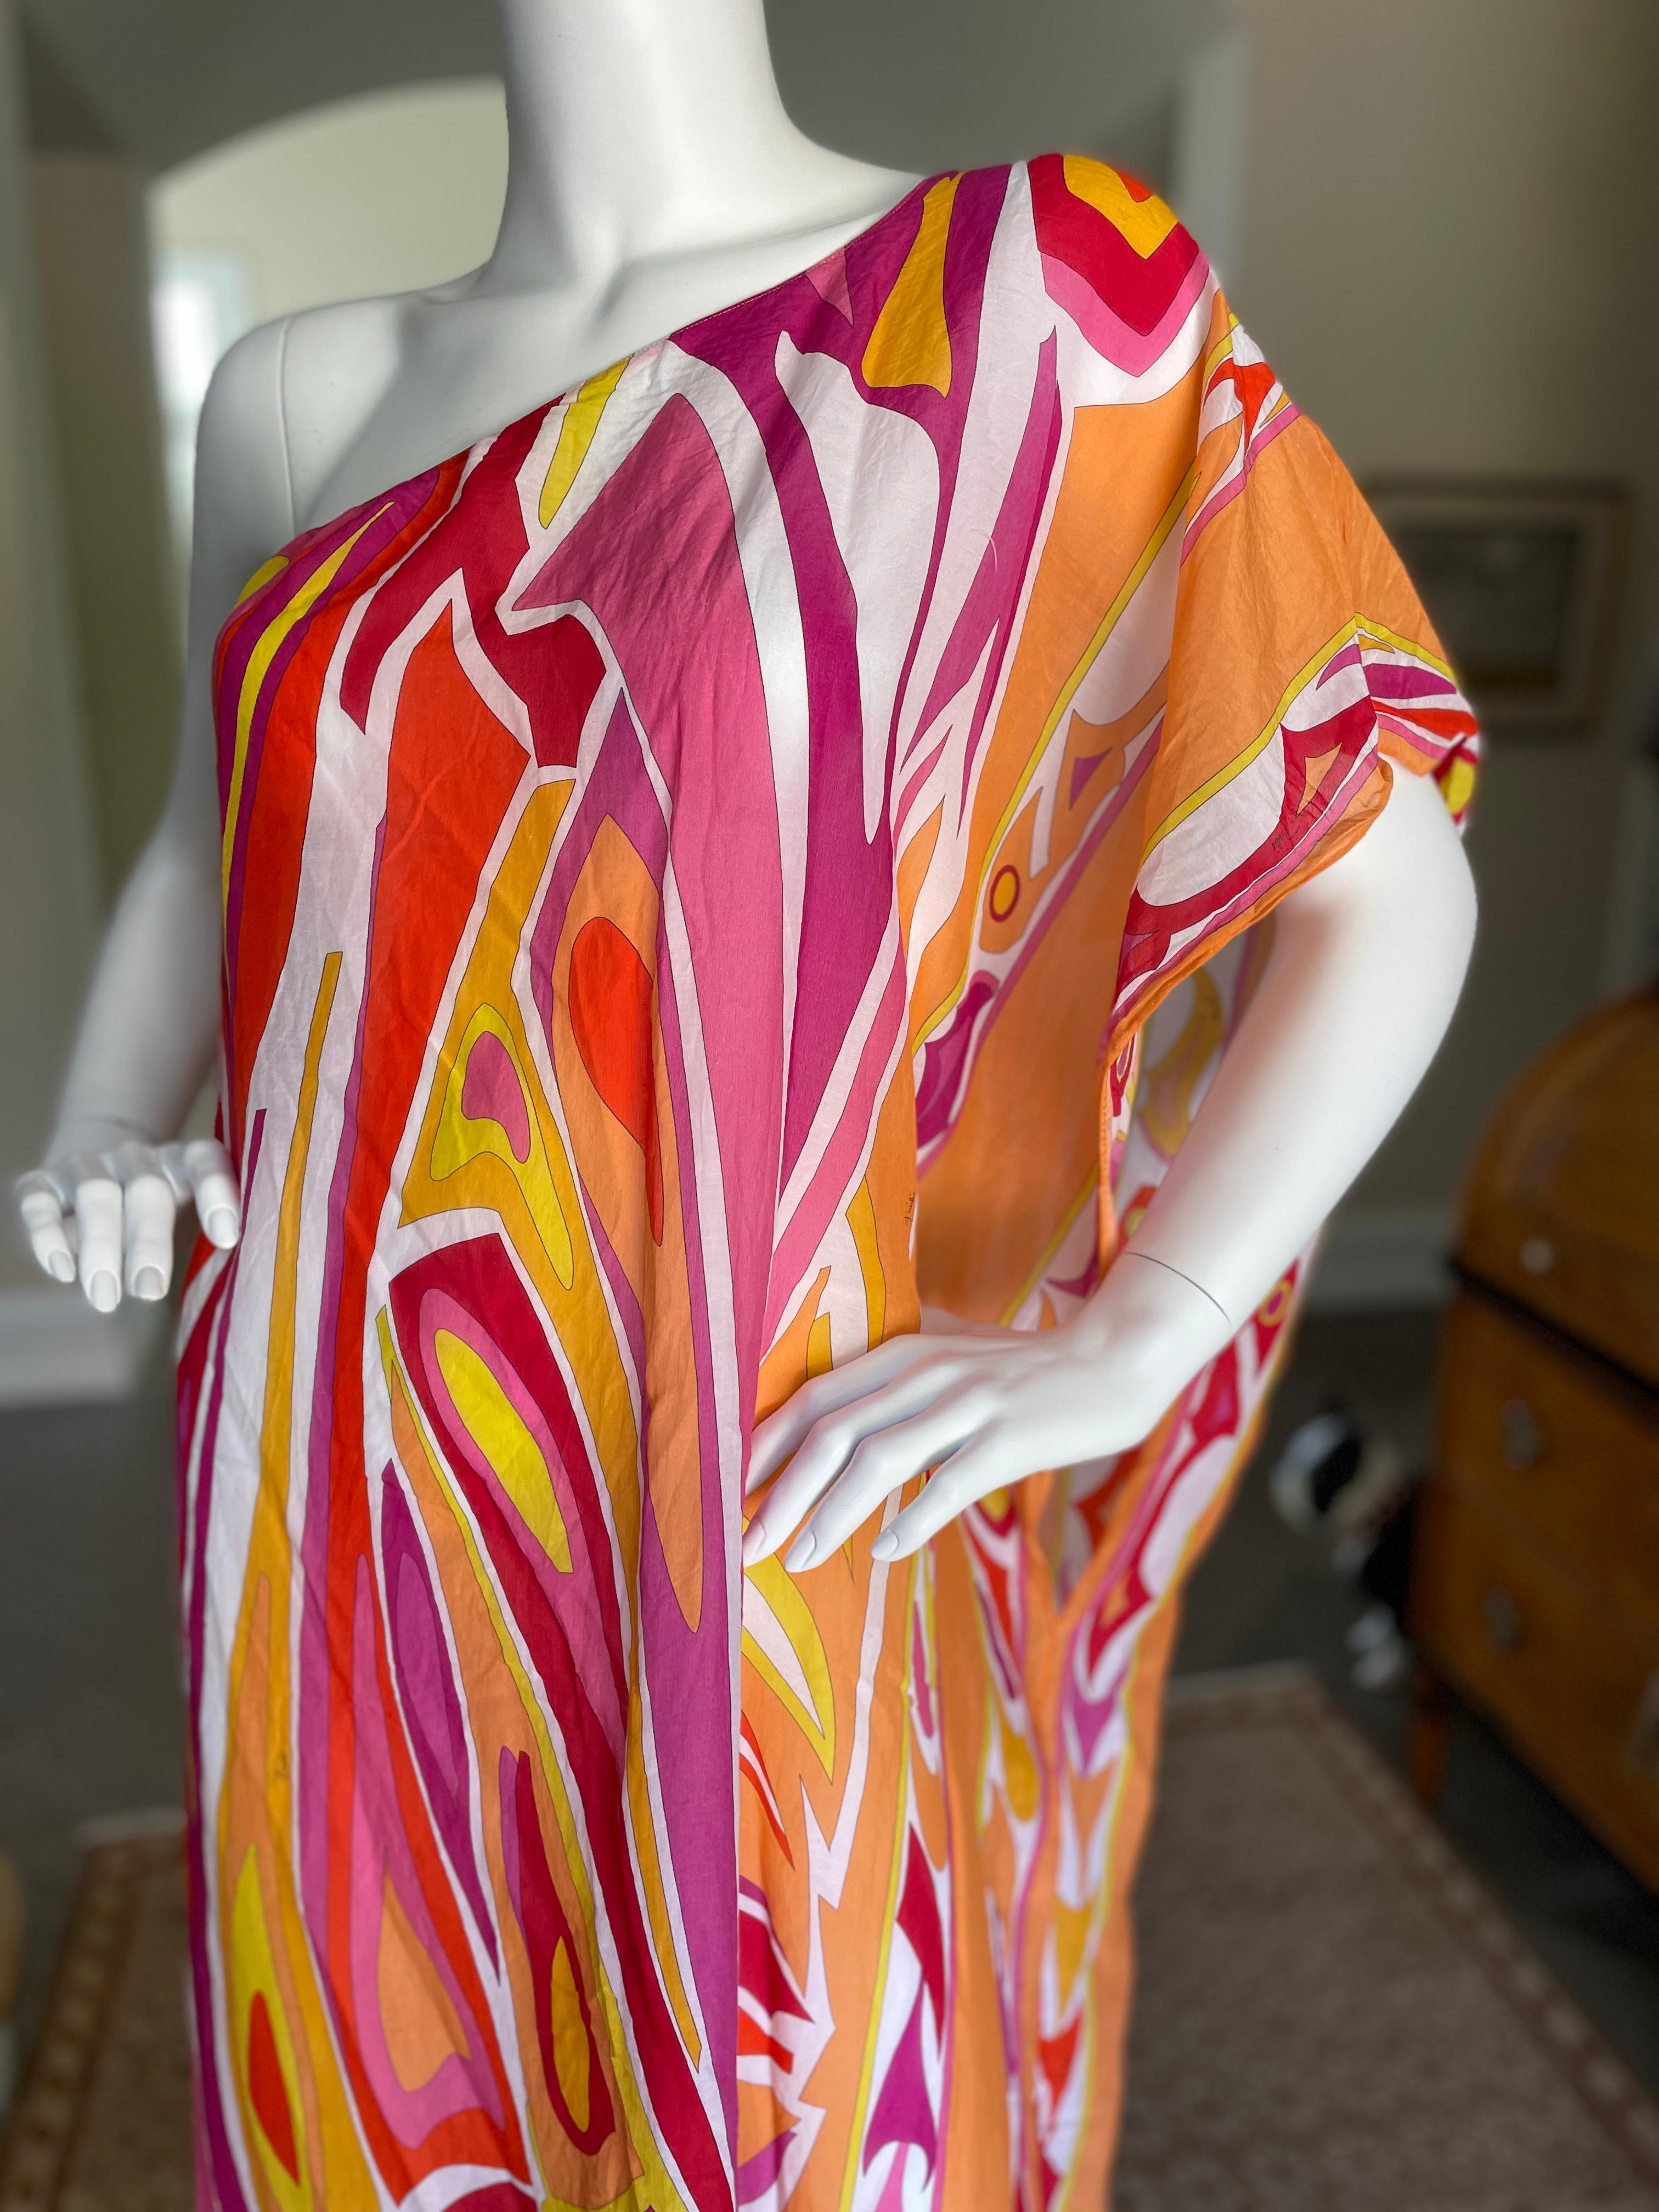 Emilio Pucci Vintage Cotton Silk Blend One Shoulder Caftan Beach Cover In Excellent Condition For Sale In Cloverdale, CA